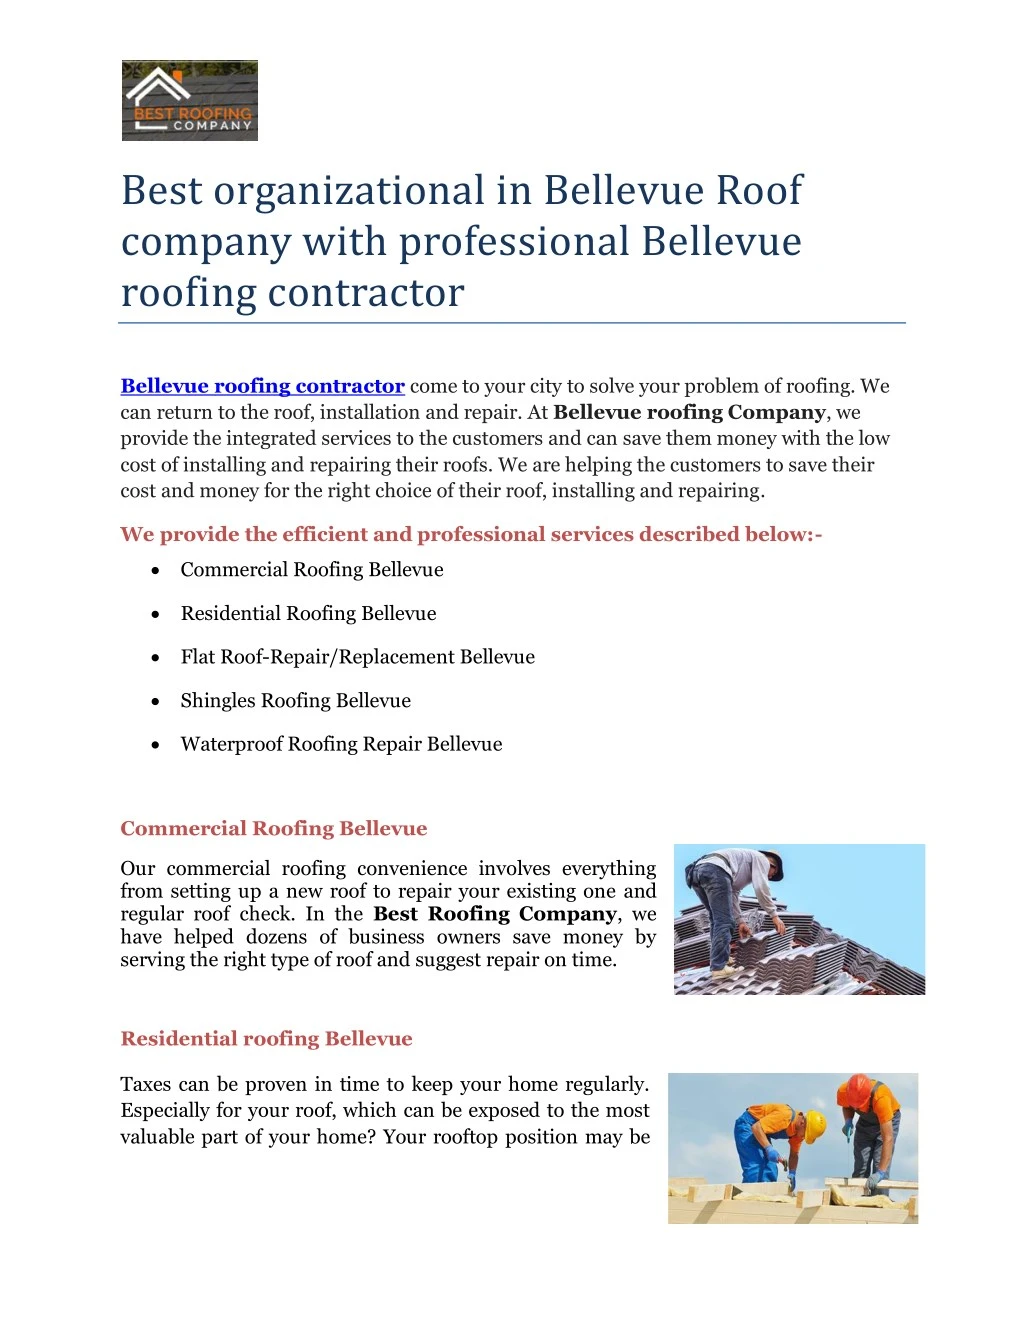 best organizational in bellevue roof company with